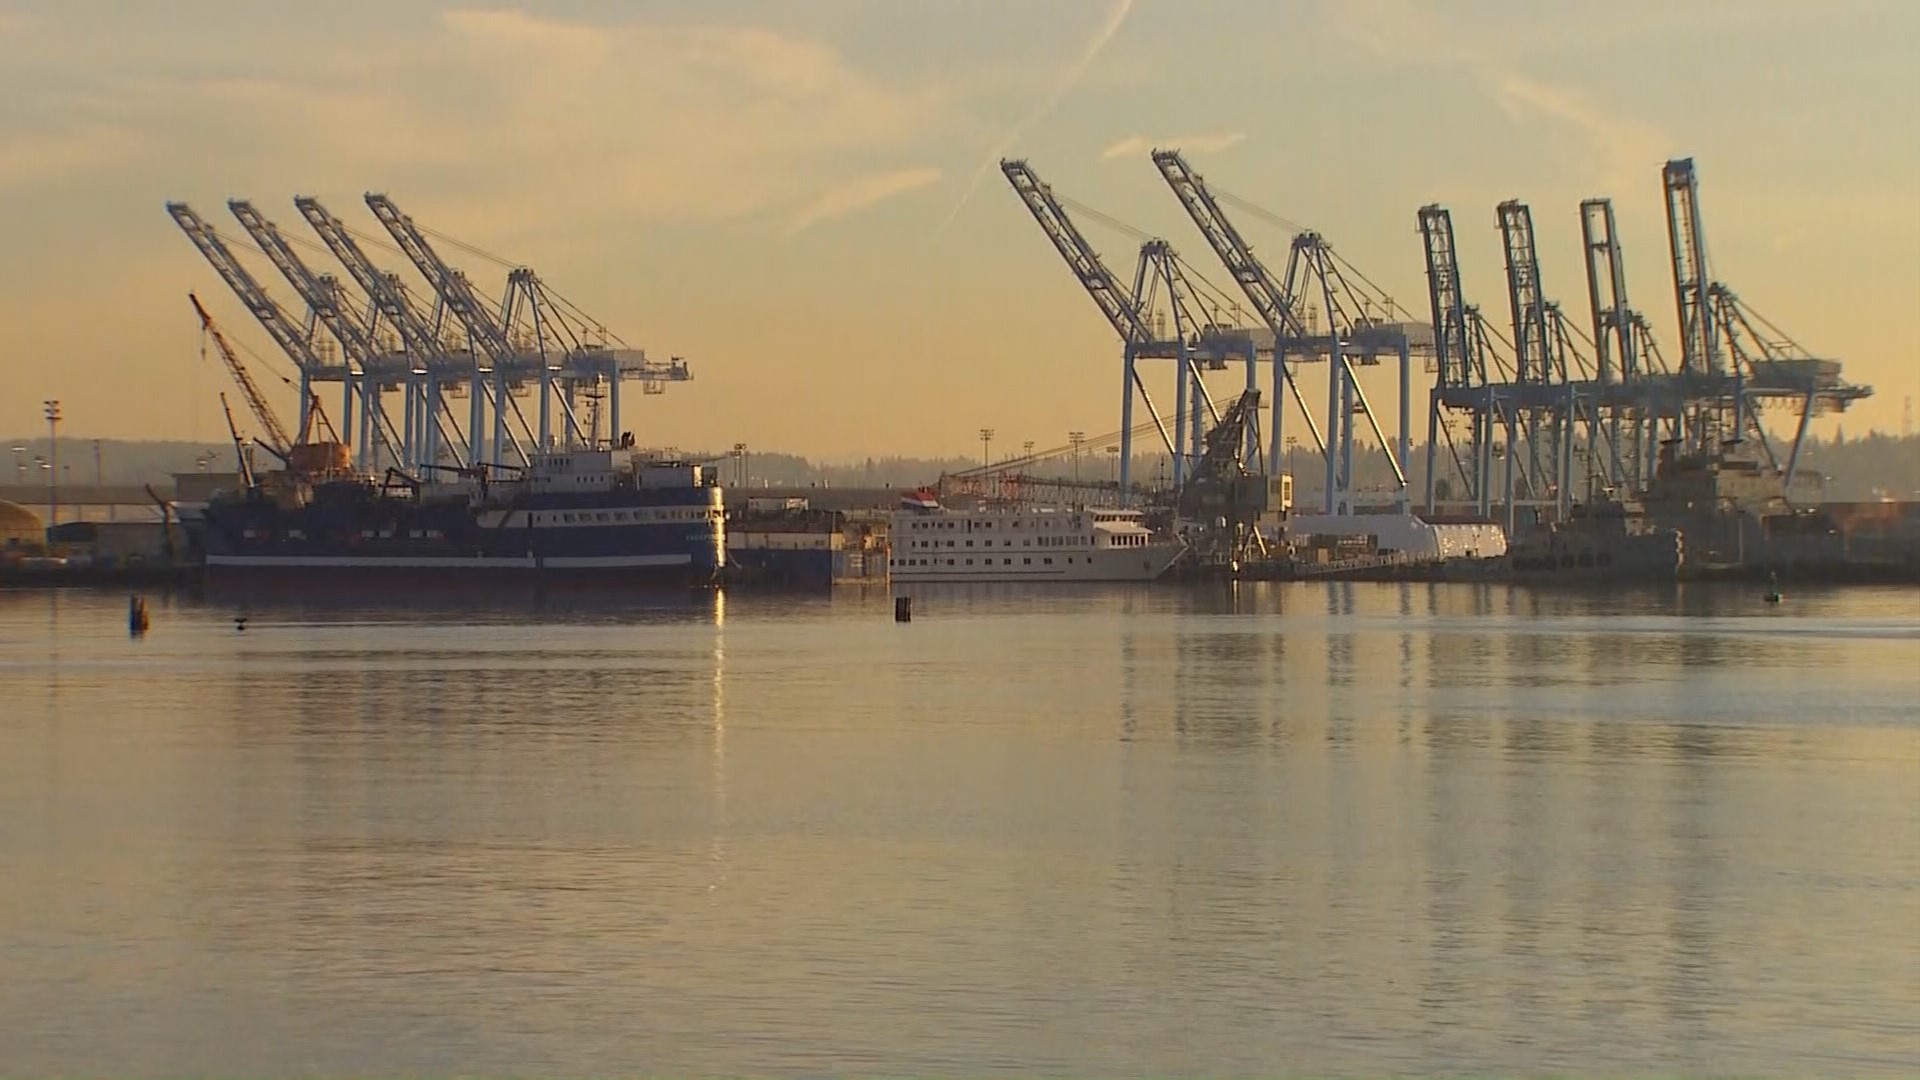 Less than 1% separates the candidates running for Position 5 on the Port of Tacoma Commission.